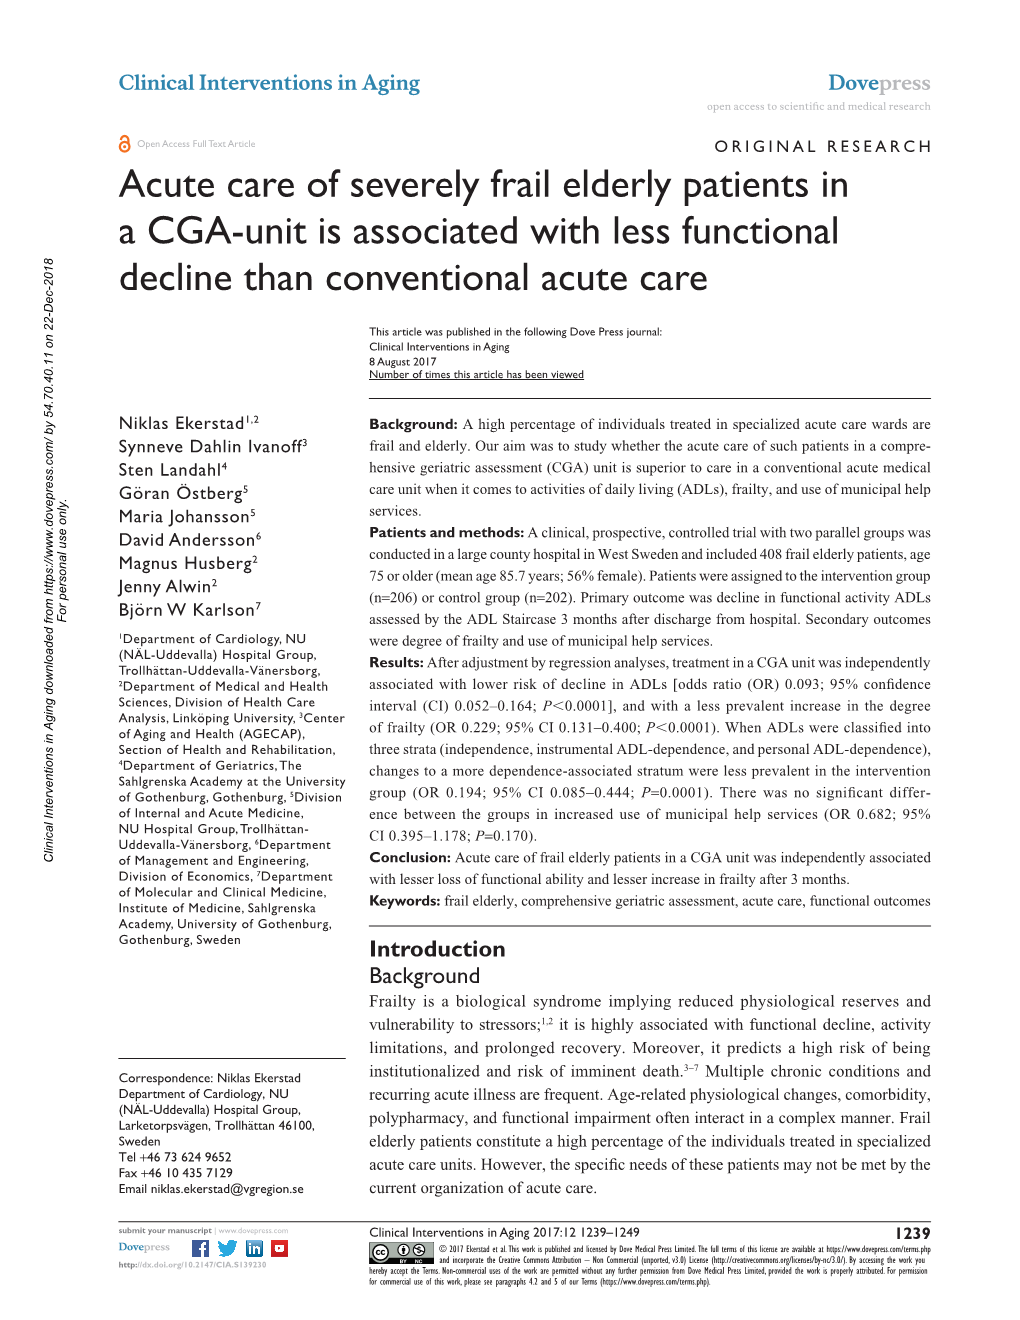 Acute Care of Severely Frail Elderly Patients in a CGA-Unit Is Associated with Less Functional Decline Than Conventional Acute Care